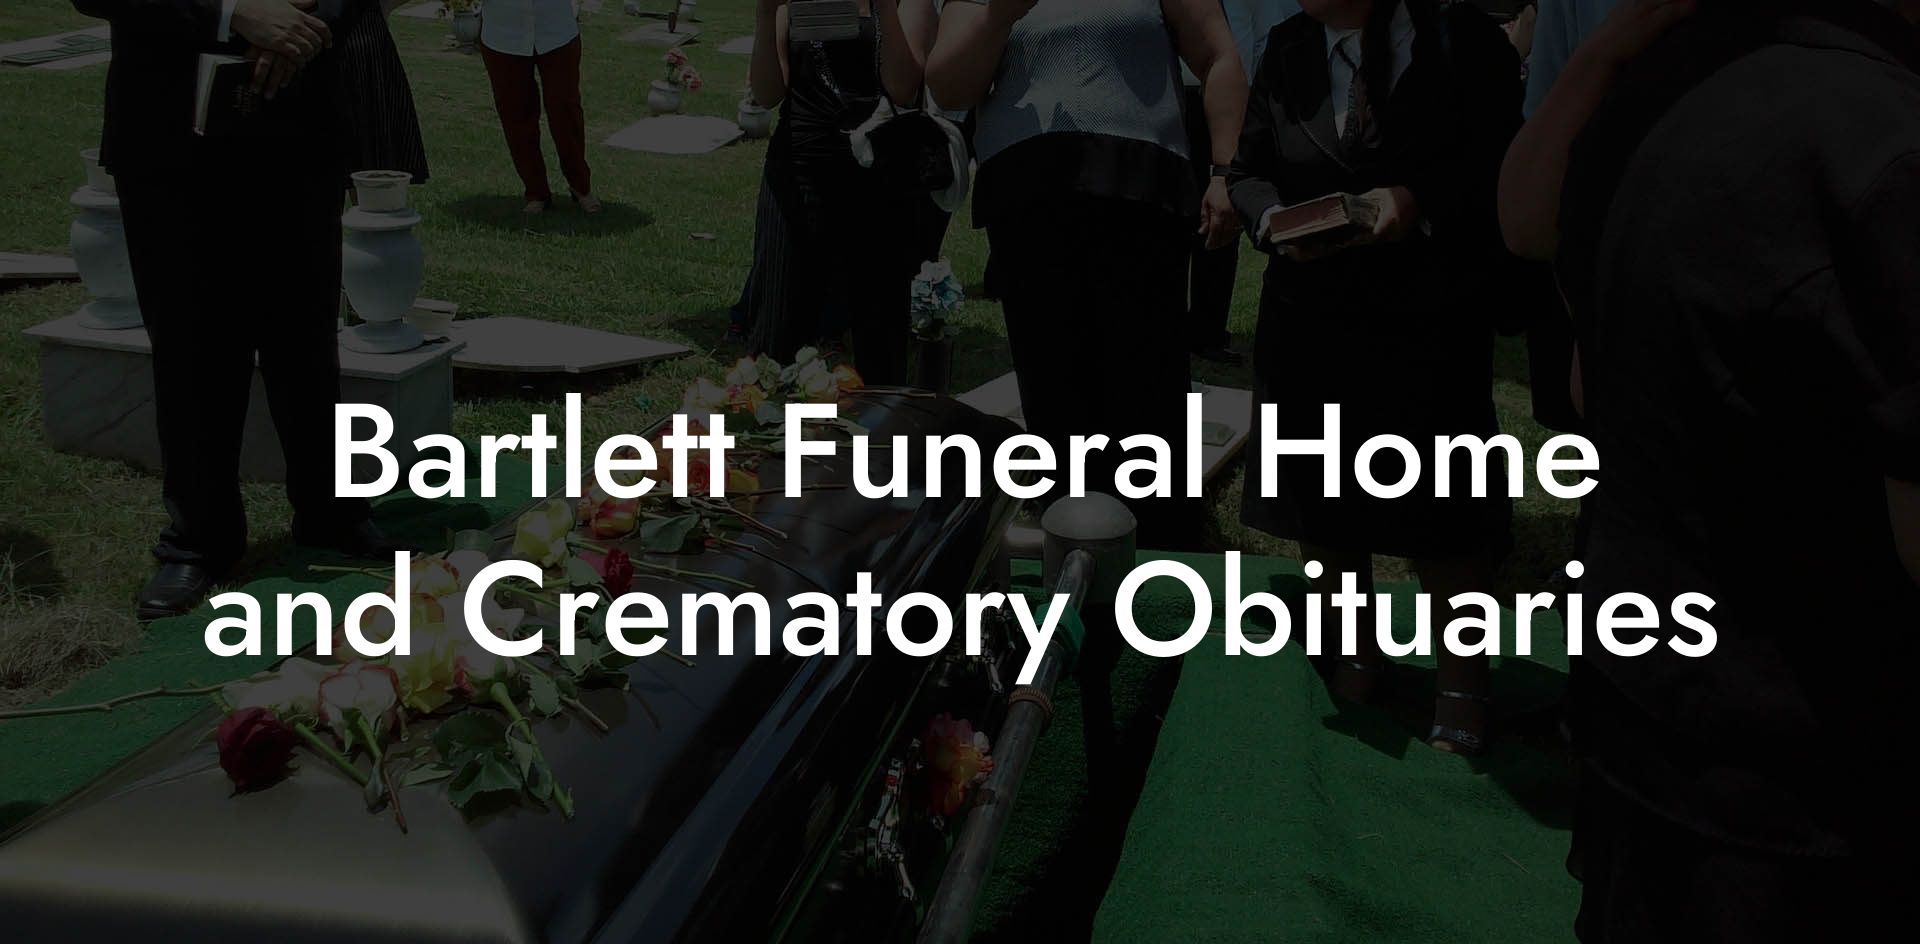 Bartlett Funeral Home and Crematory Obituaries